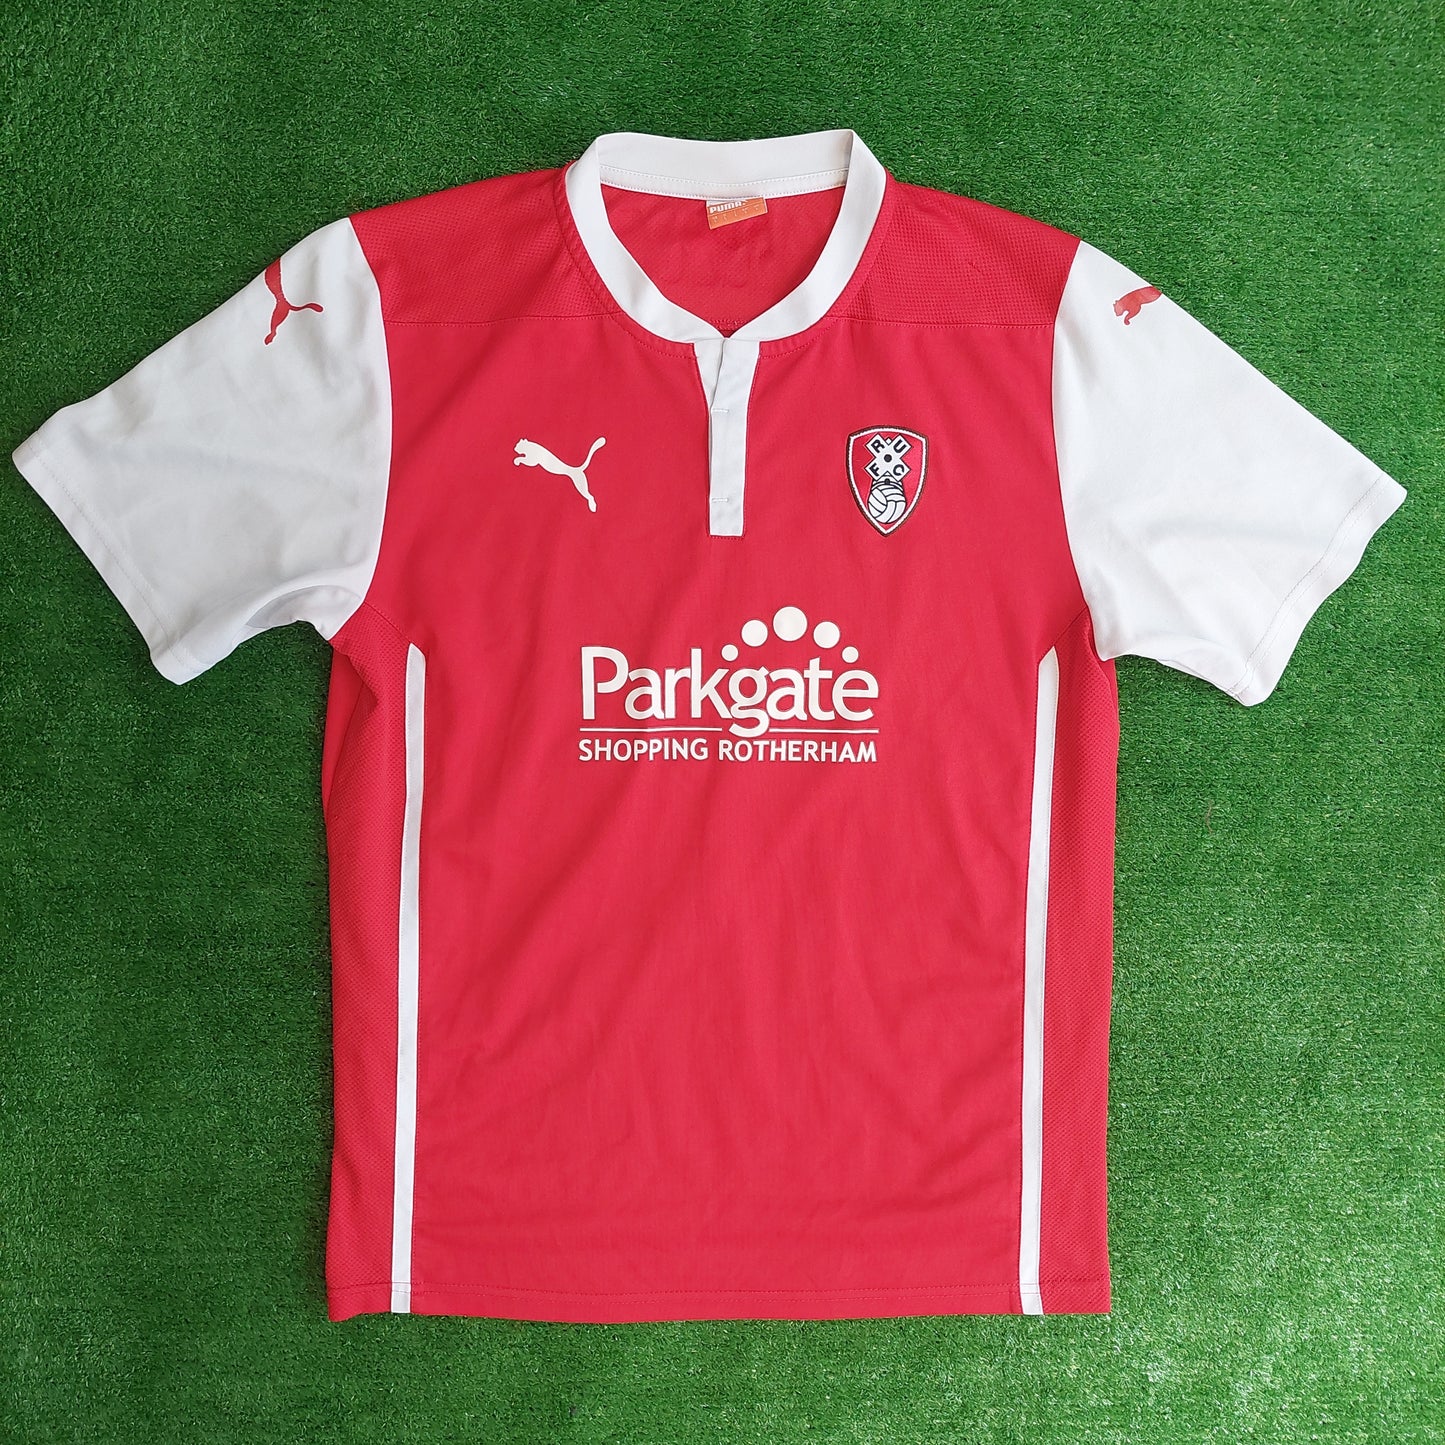 Rotherham United 2014/15 Home Shirt (Excellent) - Size L